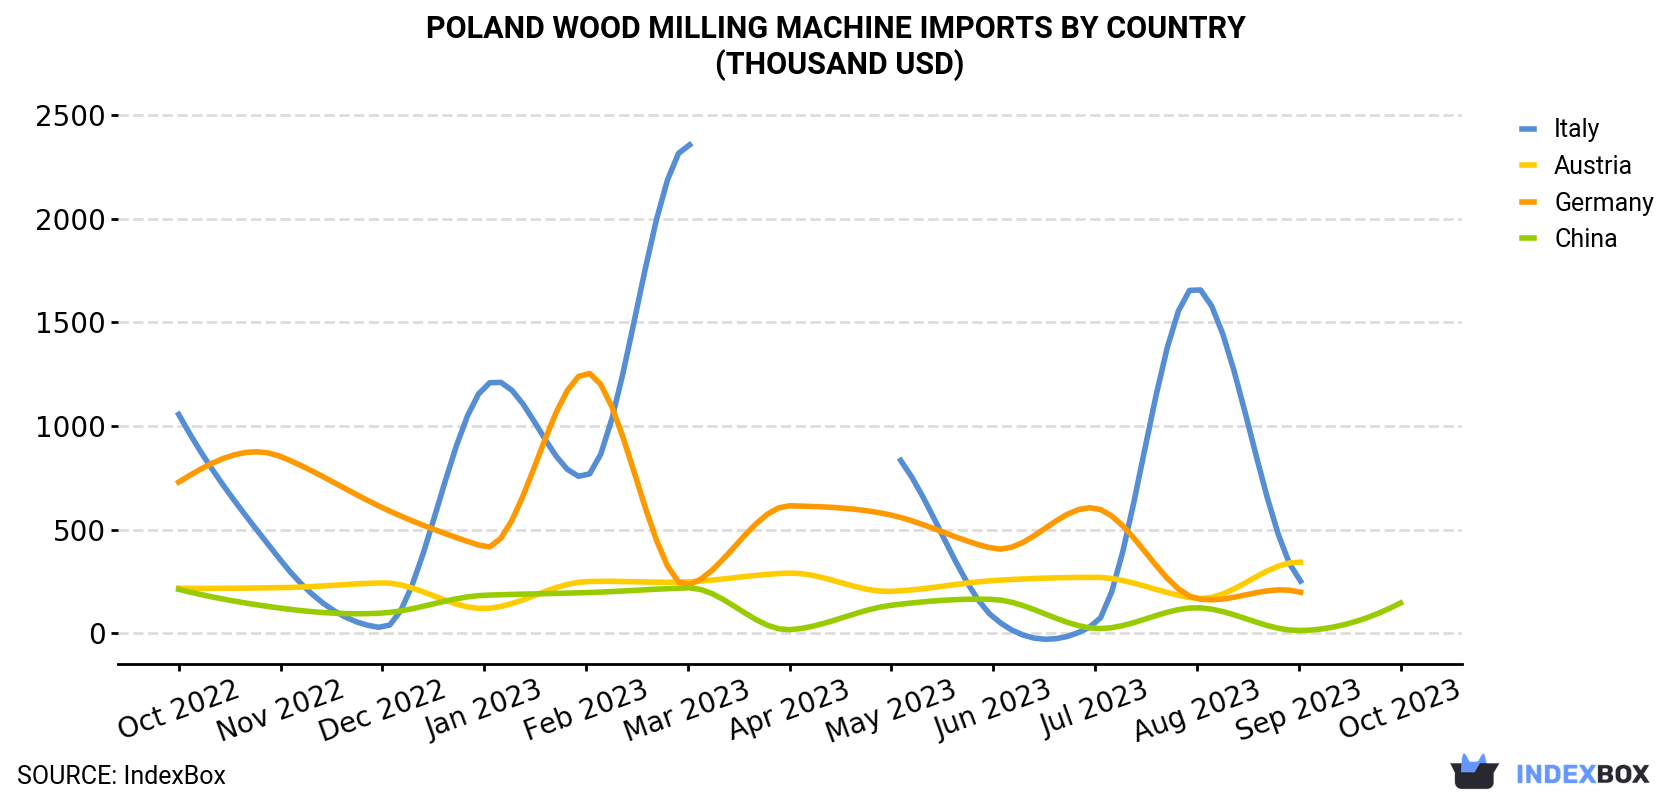 Poland Wood Milling Machine Imports By Country (Thousand USD)